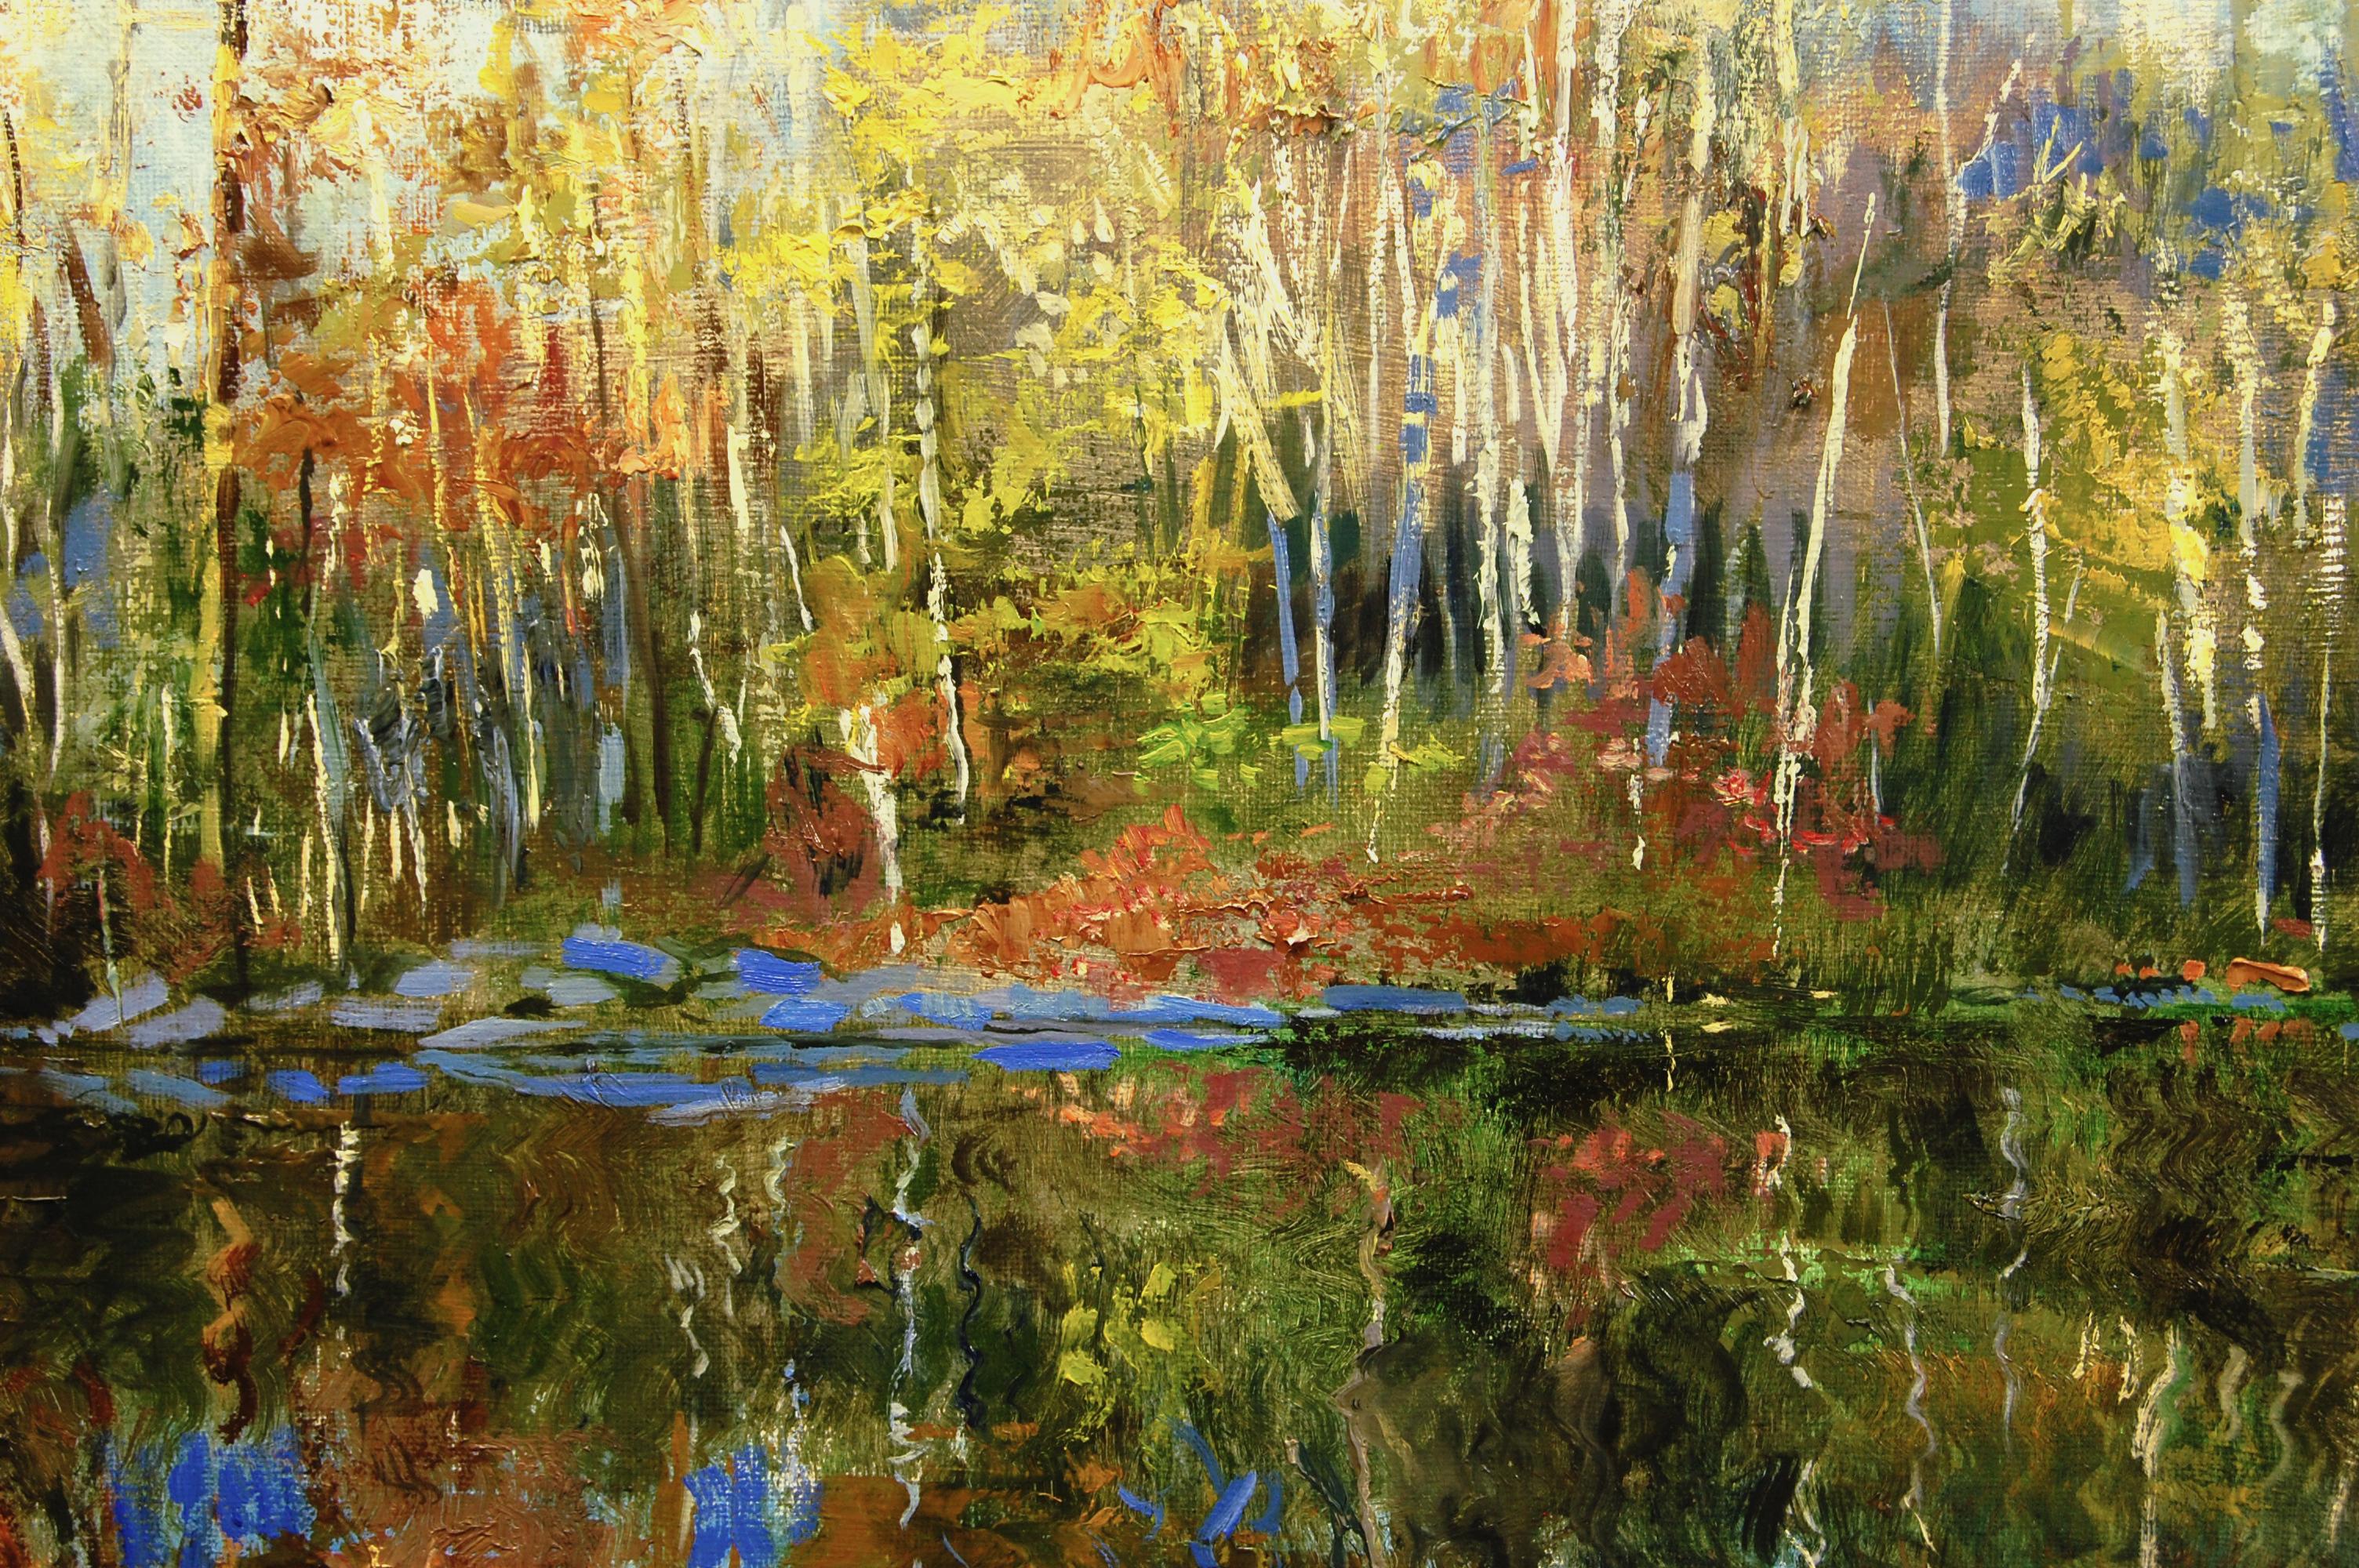 <p>Artist Comments<br>In an ode to his favorite kayak spot near his home, artist Onelio Marrero presents a  tranquil view of a forest river. He depicts the crisp fall temperature in the air, palpable to the viewer. The warm autumn foliage of golden